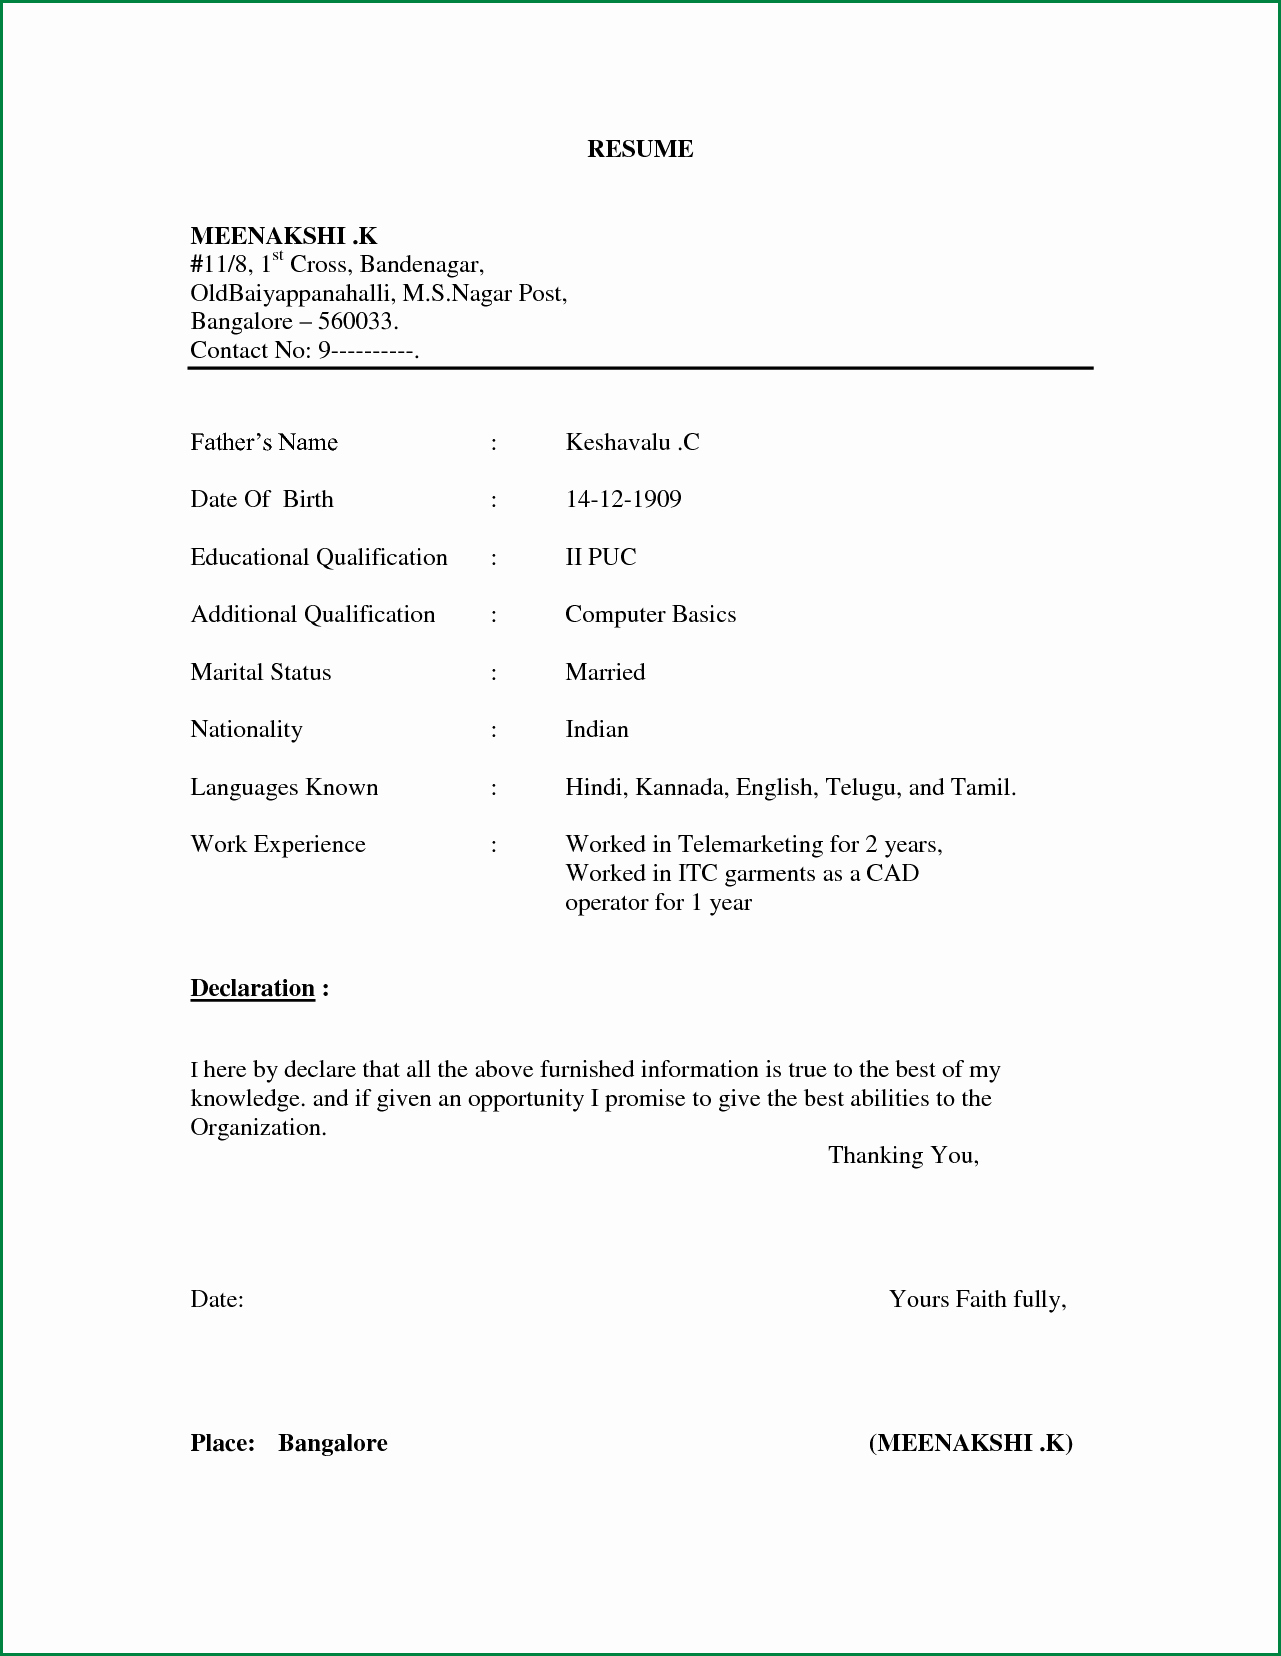 Samples Of A Basic Resume New Pin by Jayantadebnath On Resume Fresher